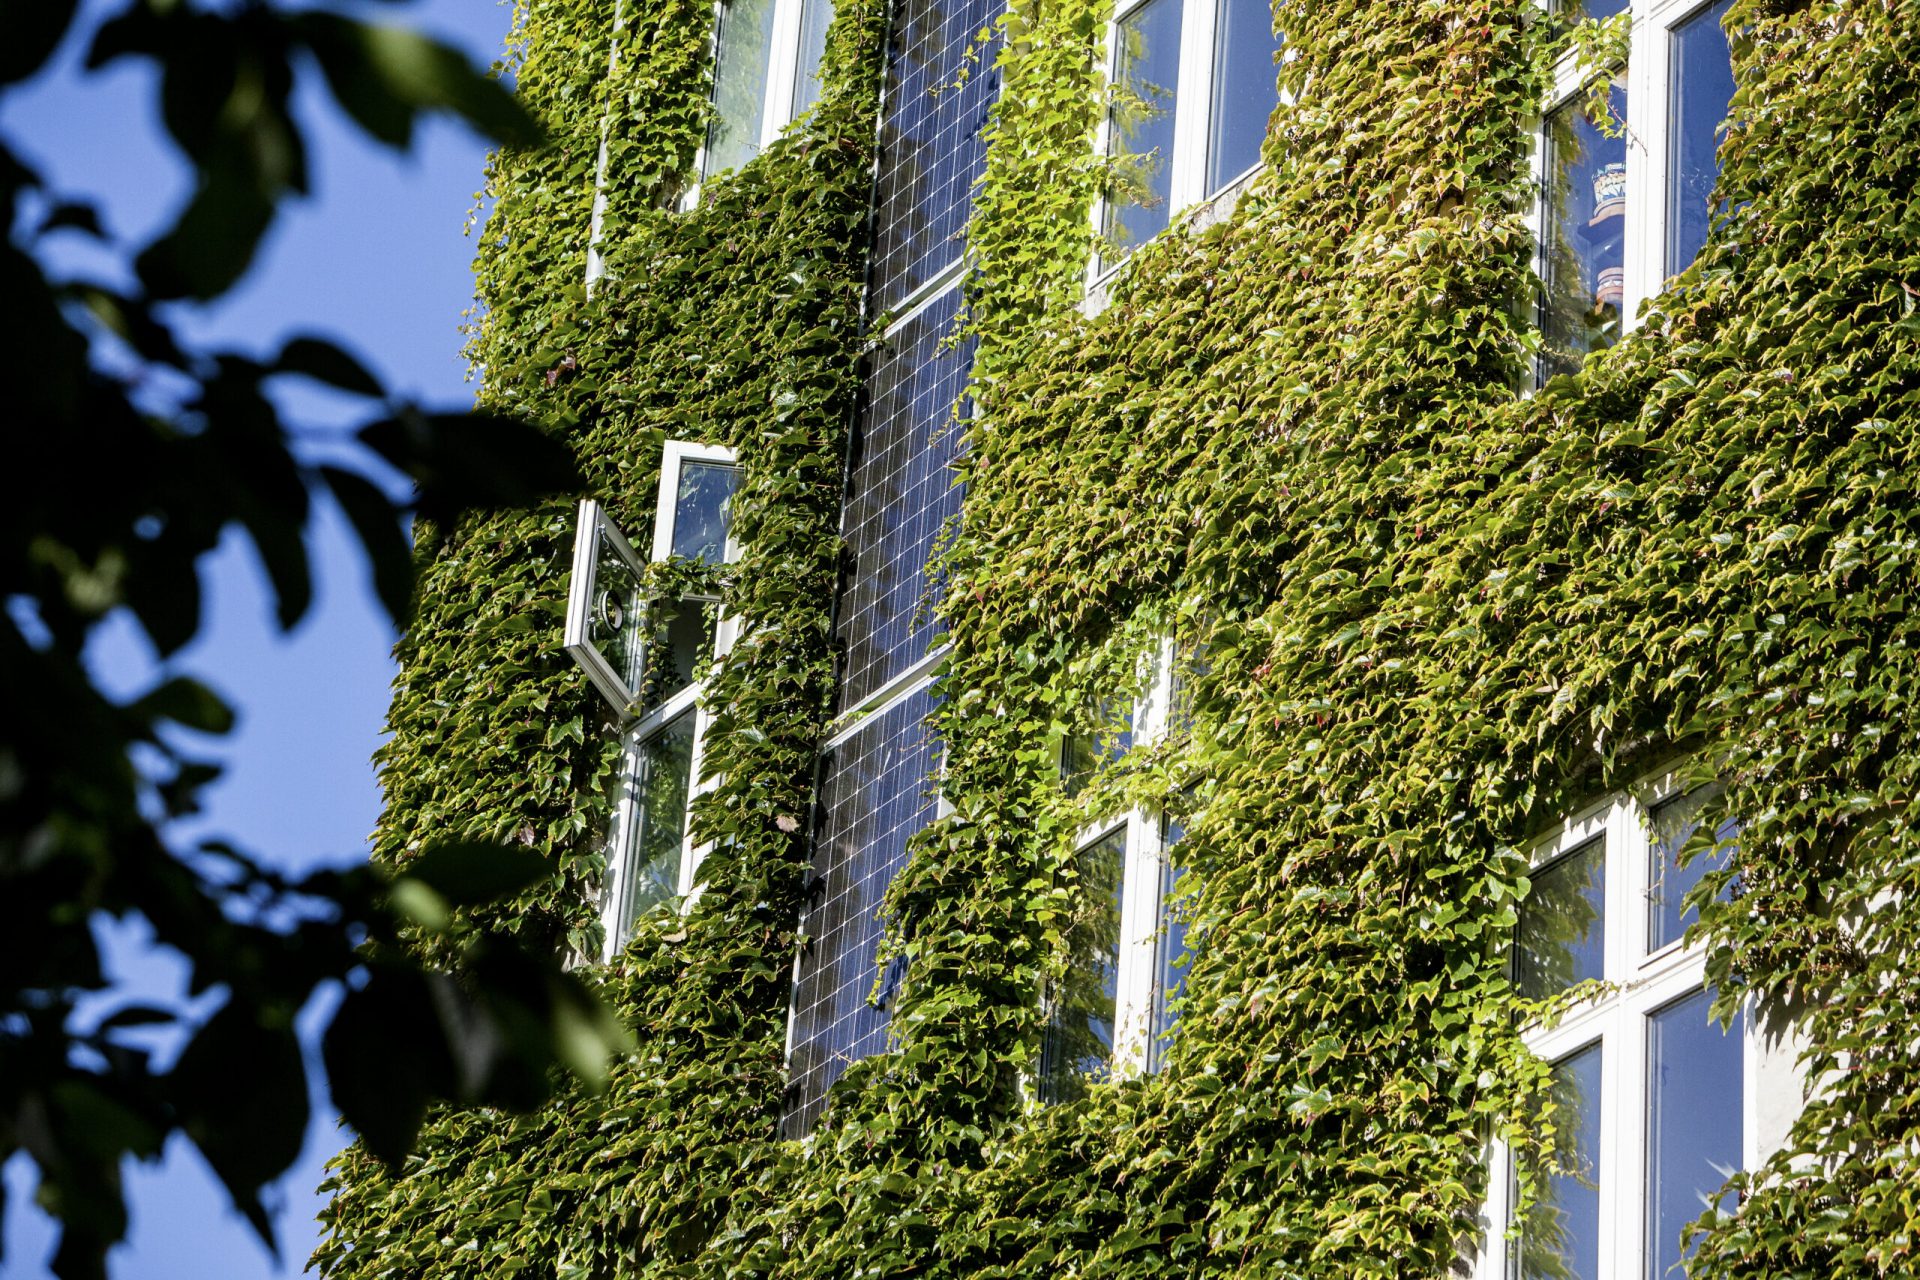 One house façade is completely overgrown with ivy, only the windows and solar panels are still visible.